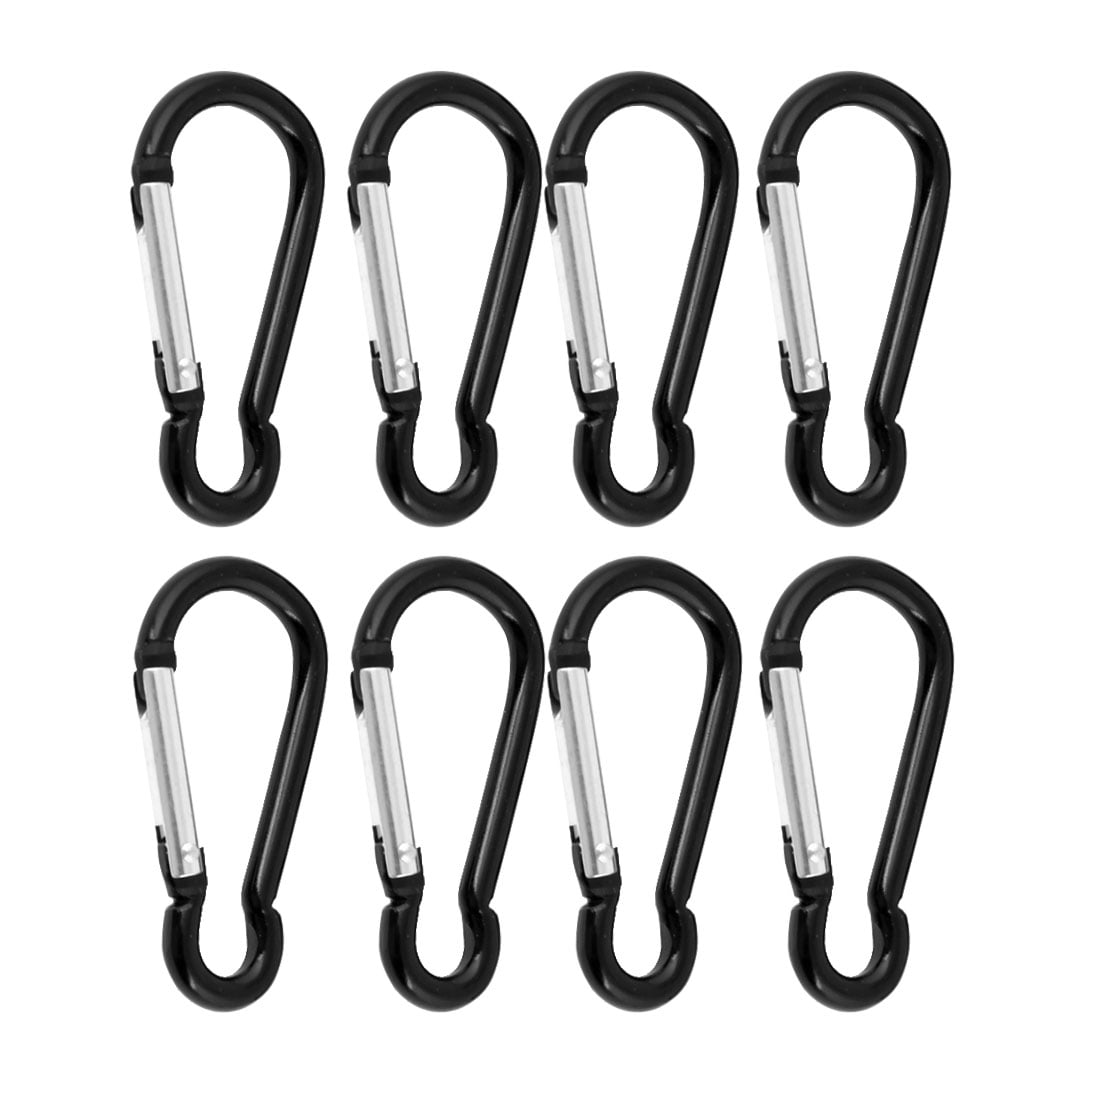 Hiking Green Billow 10 Pack Carabiner Clip,Durable Aluminum D Ring Locking Buckle Clip Small Keychain Hook for Outdoor Camping